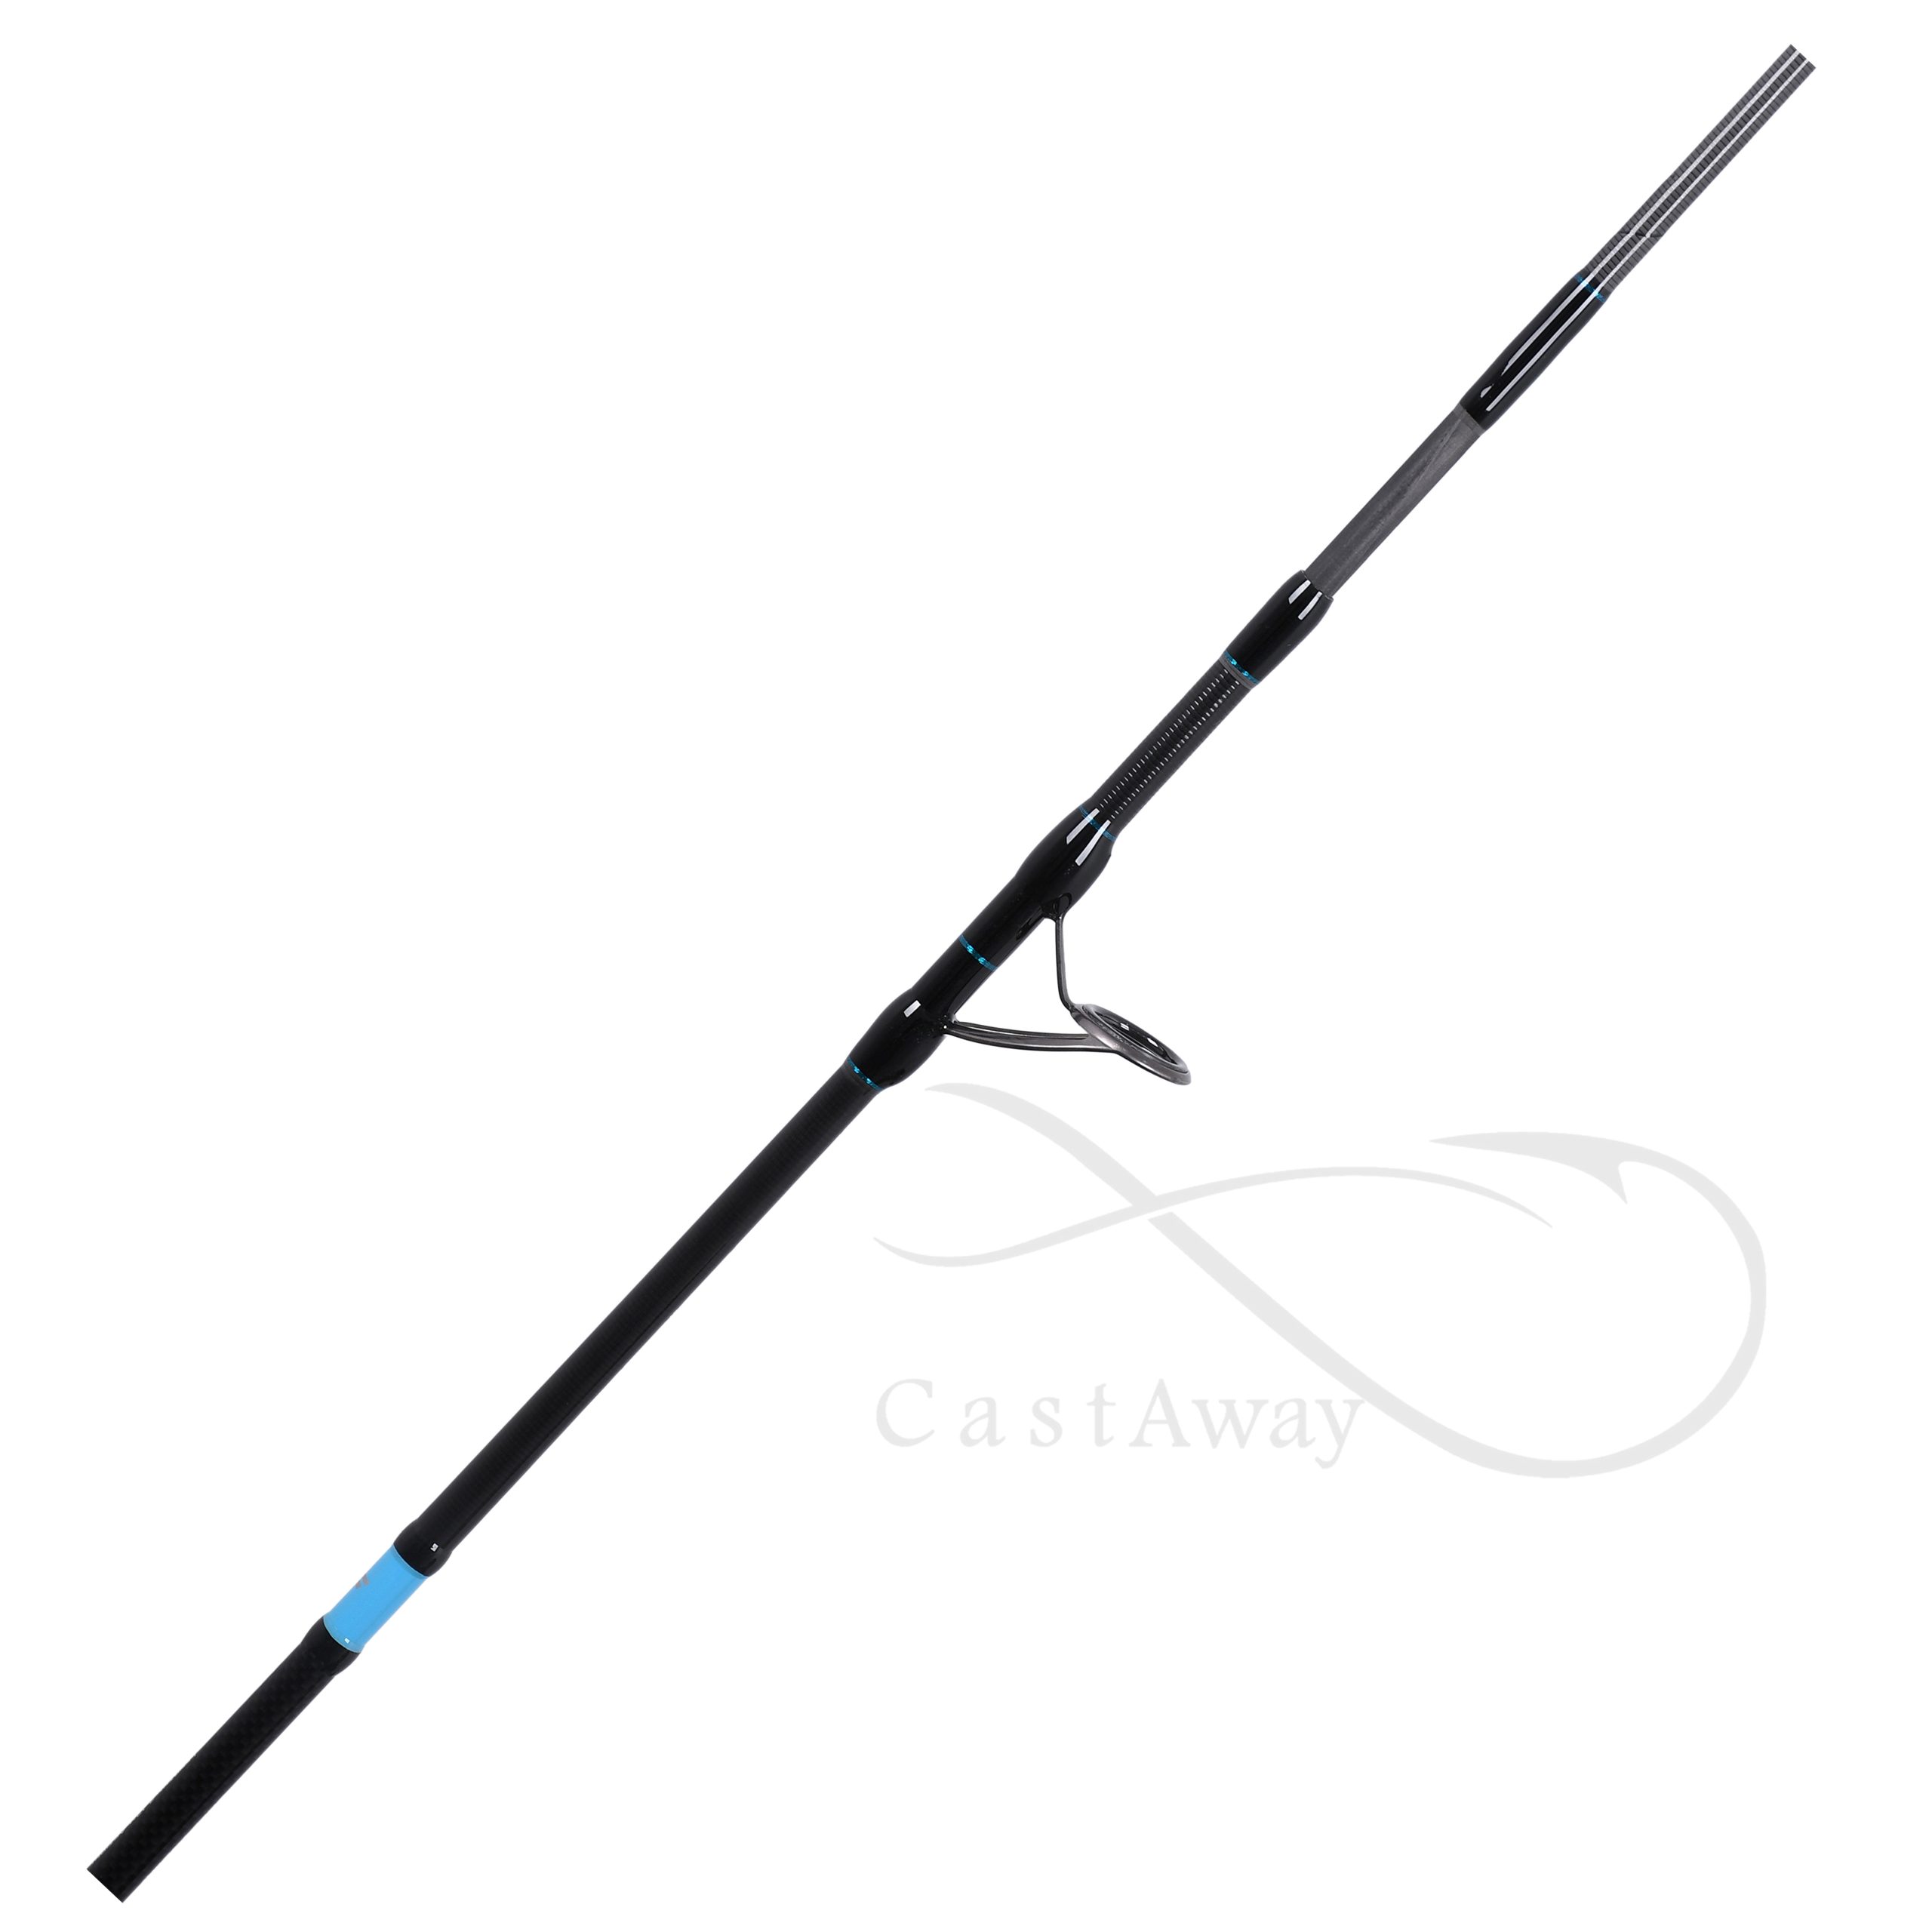 Favorite X1 SW Offshore Spinning Rod - Castaway - Reel me into the sea